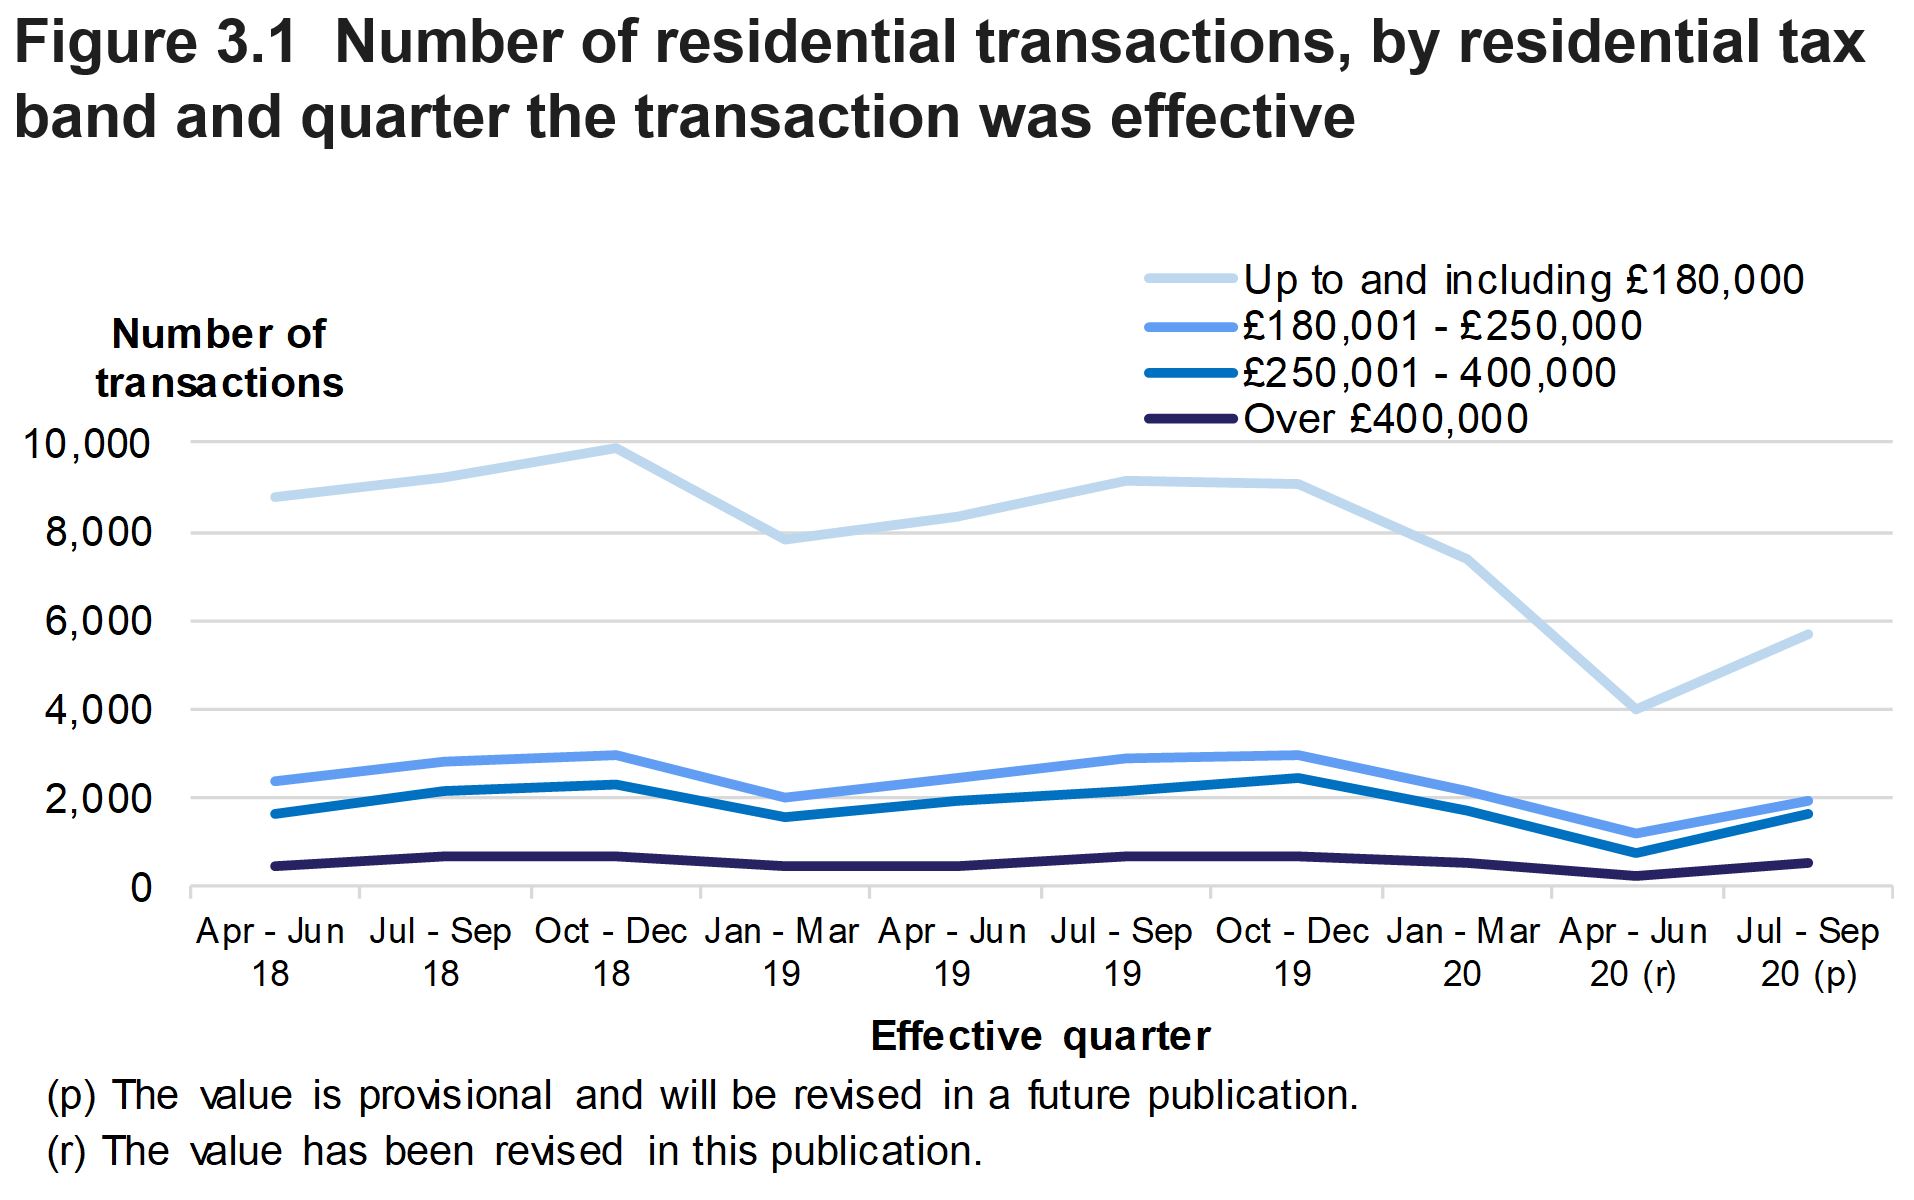 Figure 3.1 shows the number of residential transactions, by residential tax band and quarter the transaction was effective.